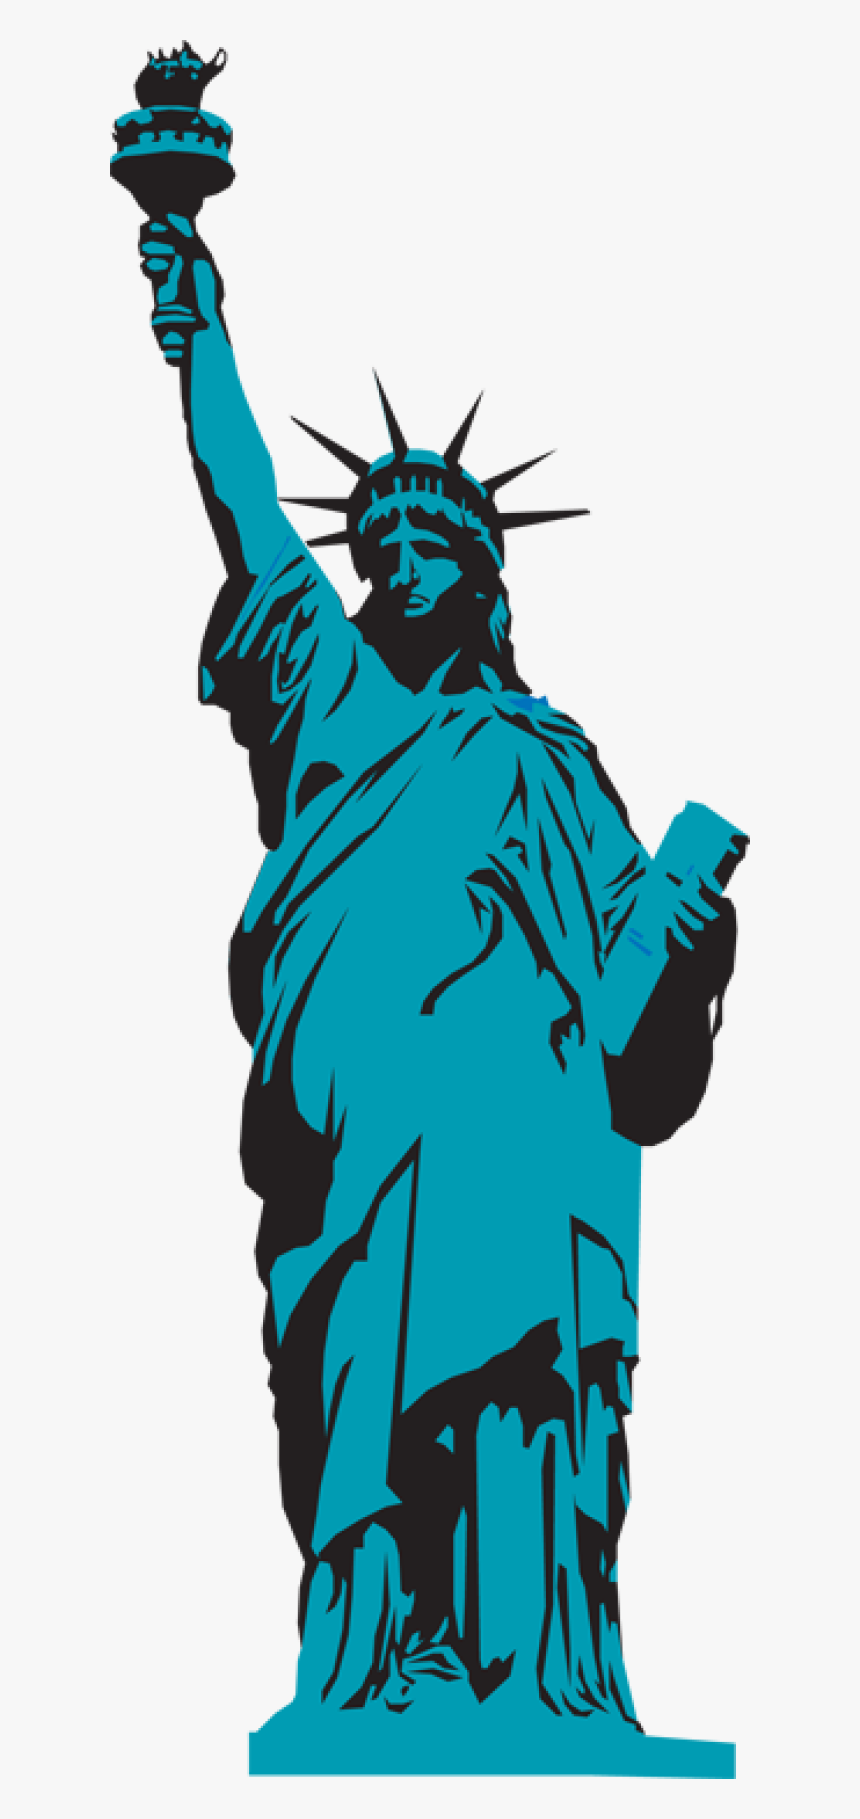 Statue Of Liberty Silhouette Vector At Getdrawings - Statue Of Liberty, HD Png Download, Free Download